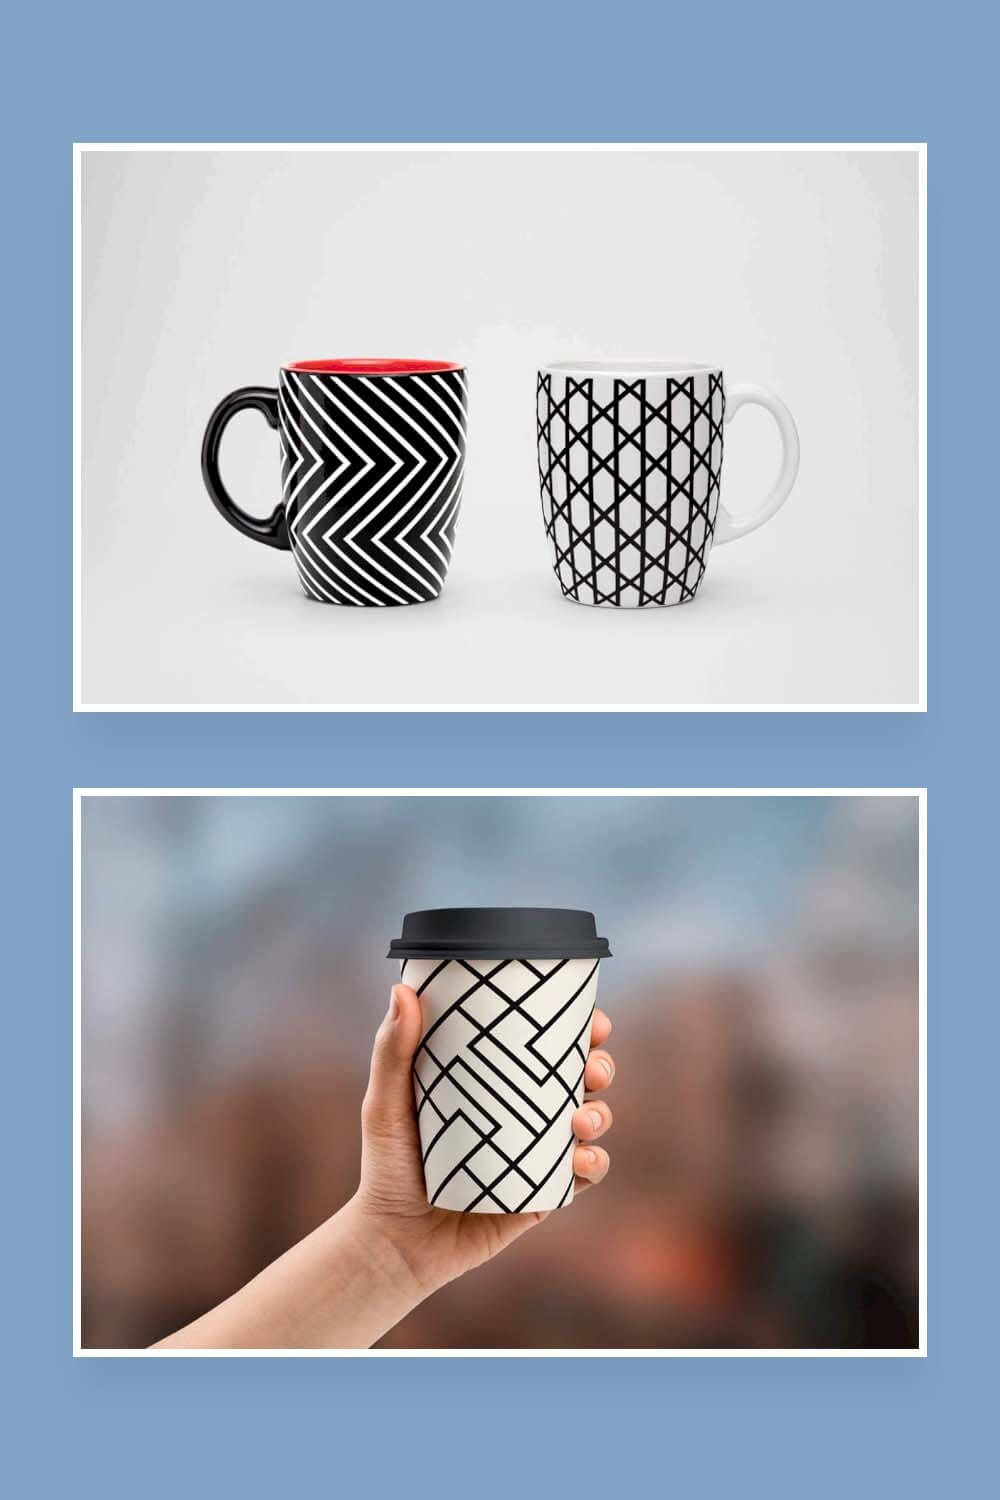 Three samples of geometric seamless patterns on merchandise in the form of two cups and one disposable glass with a lid.